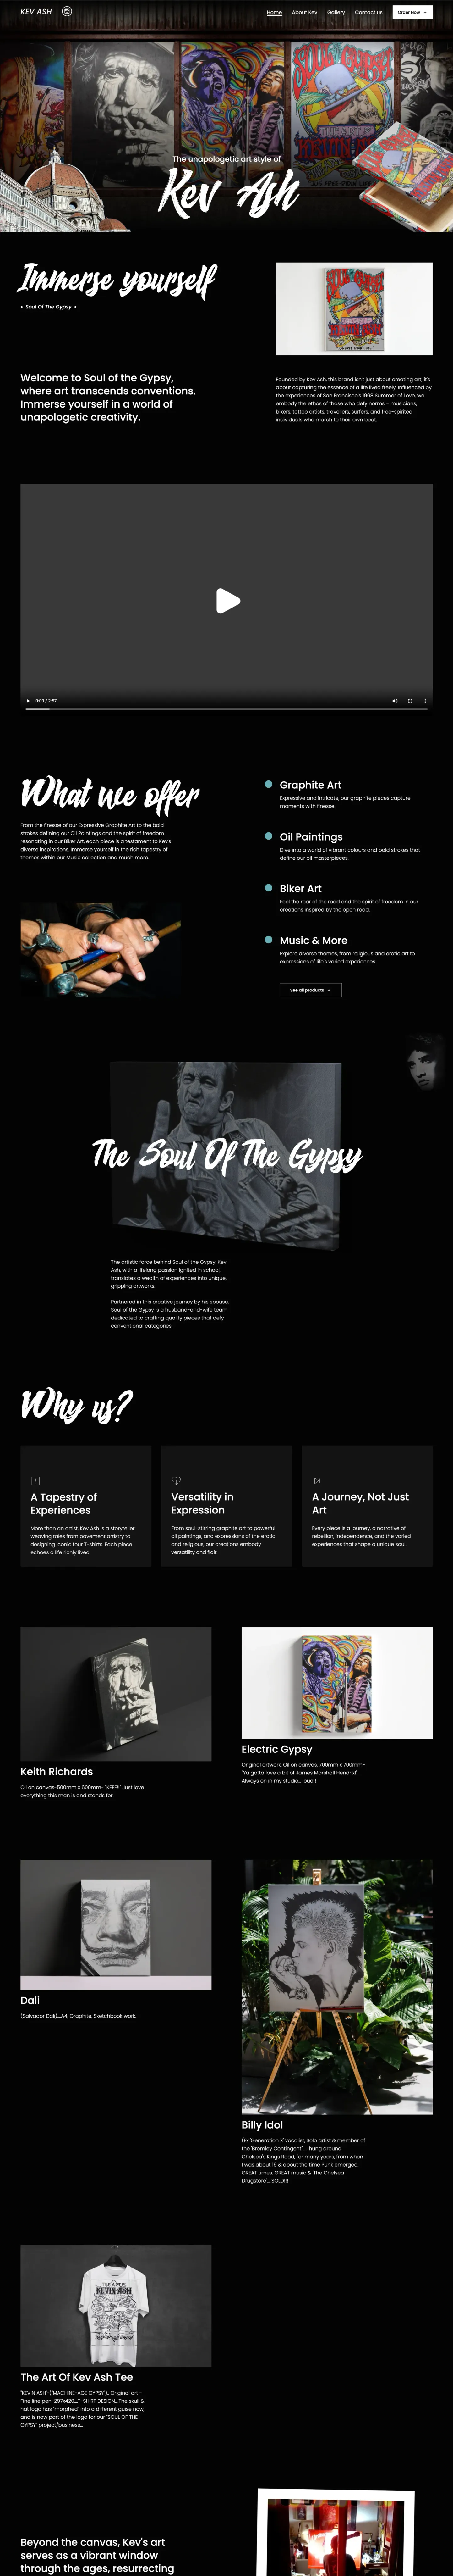 Soul Of The Gypsy Website Home Page | Kev Ash Art Jersey by Island Web Design